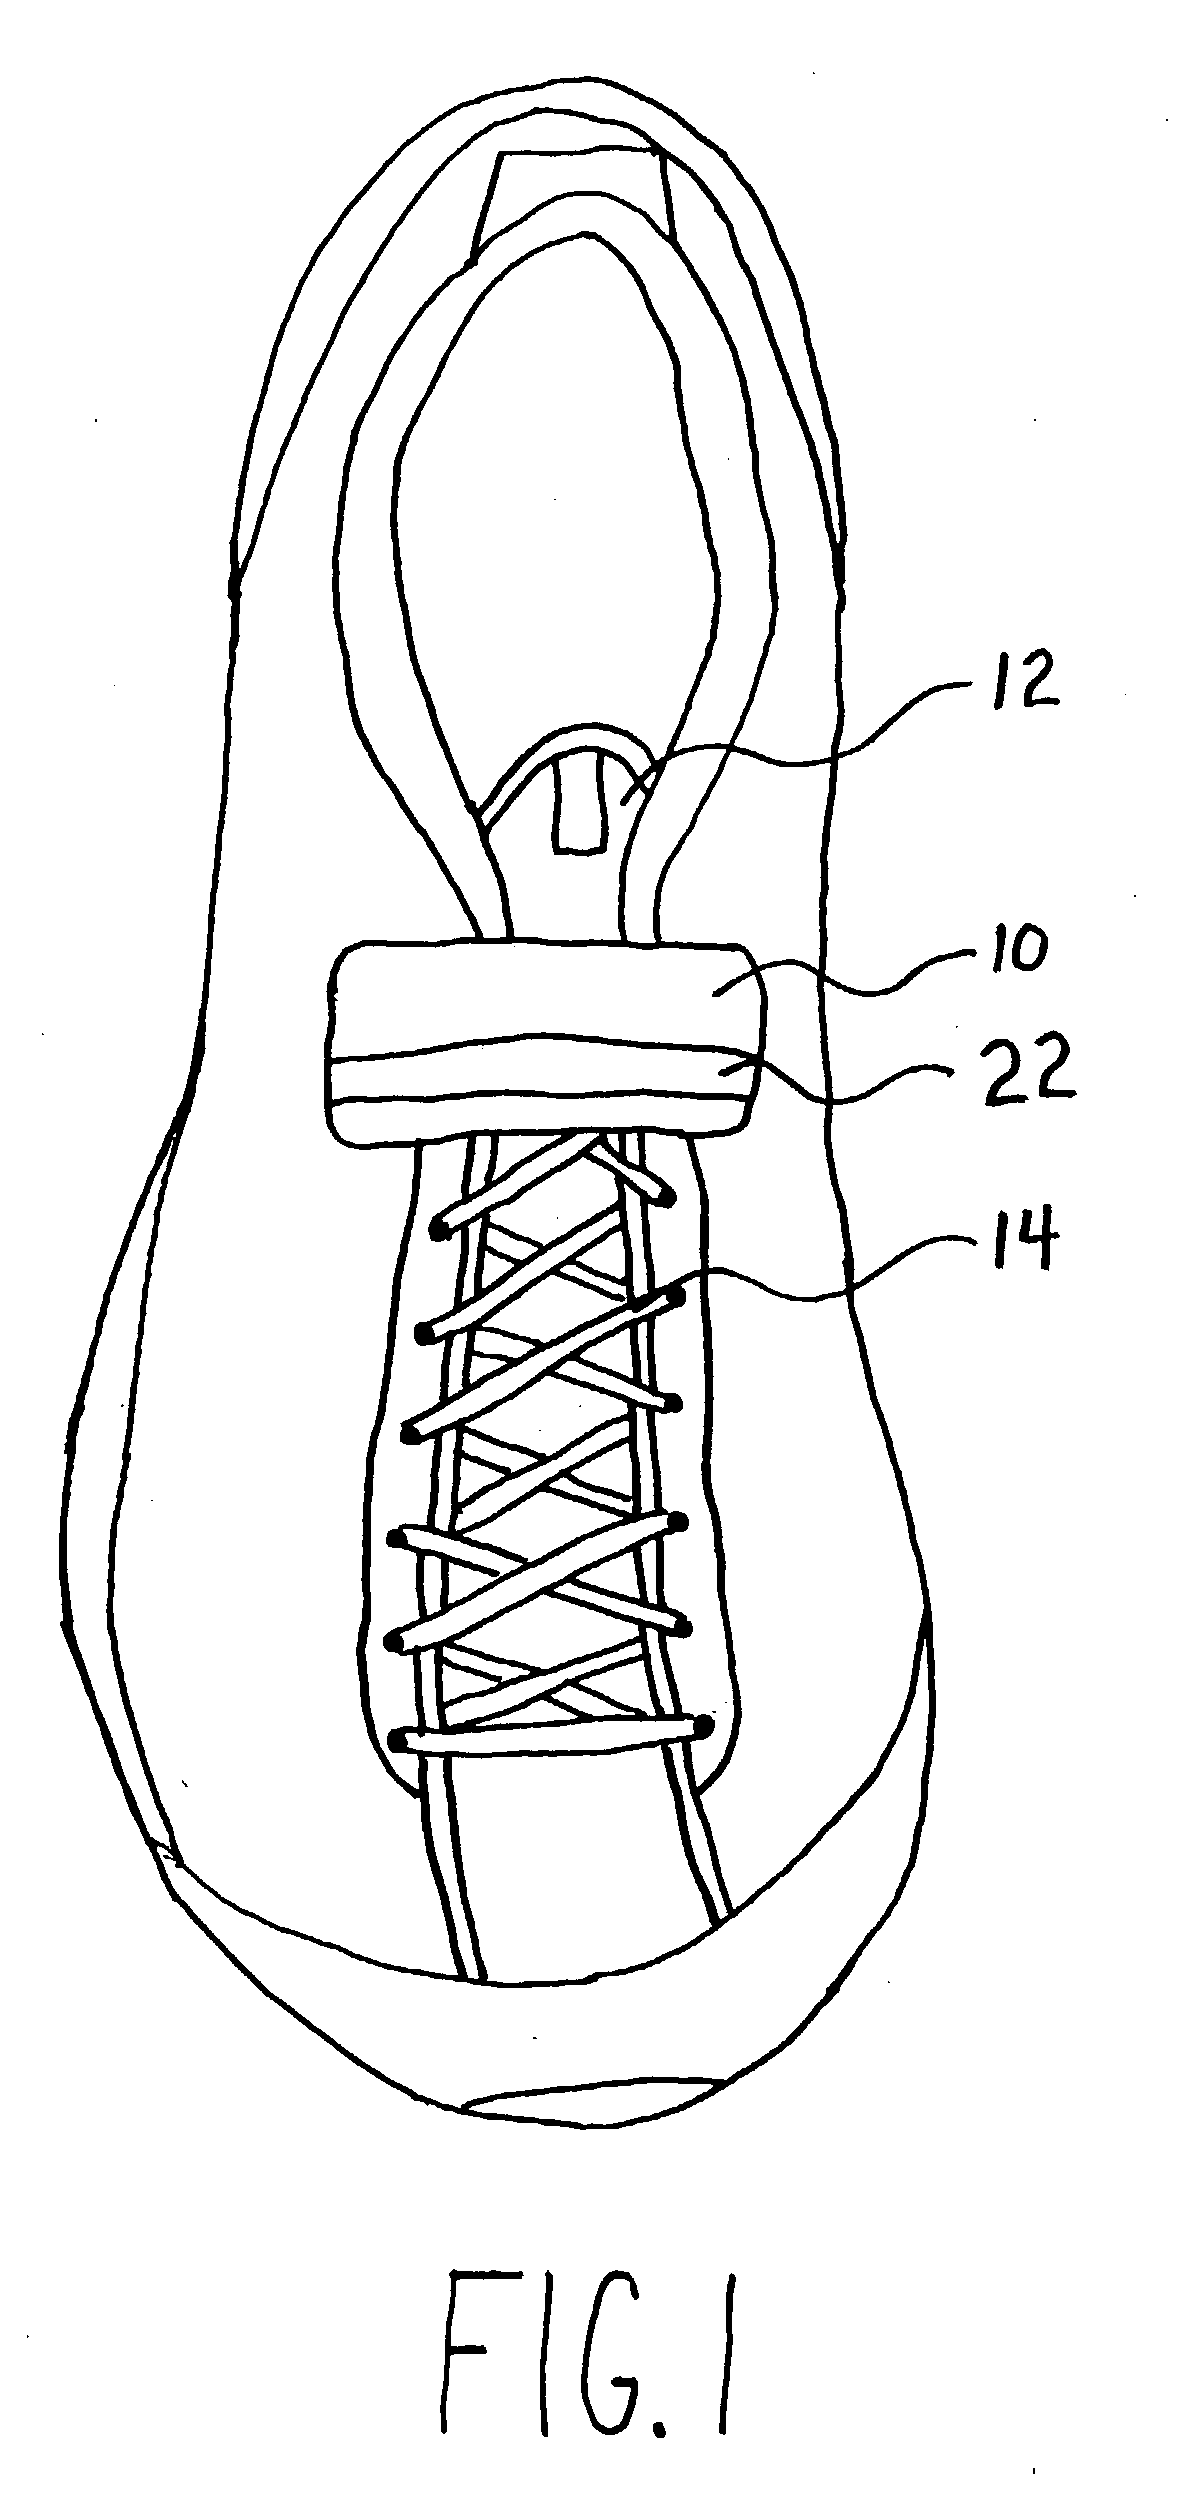 Pouch for concealing and containing shoelaces